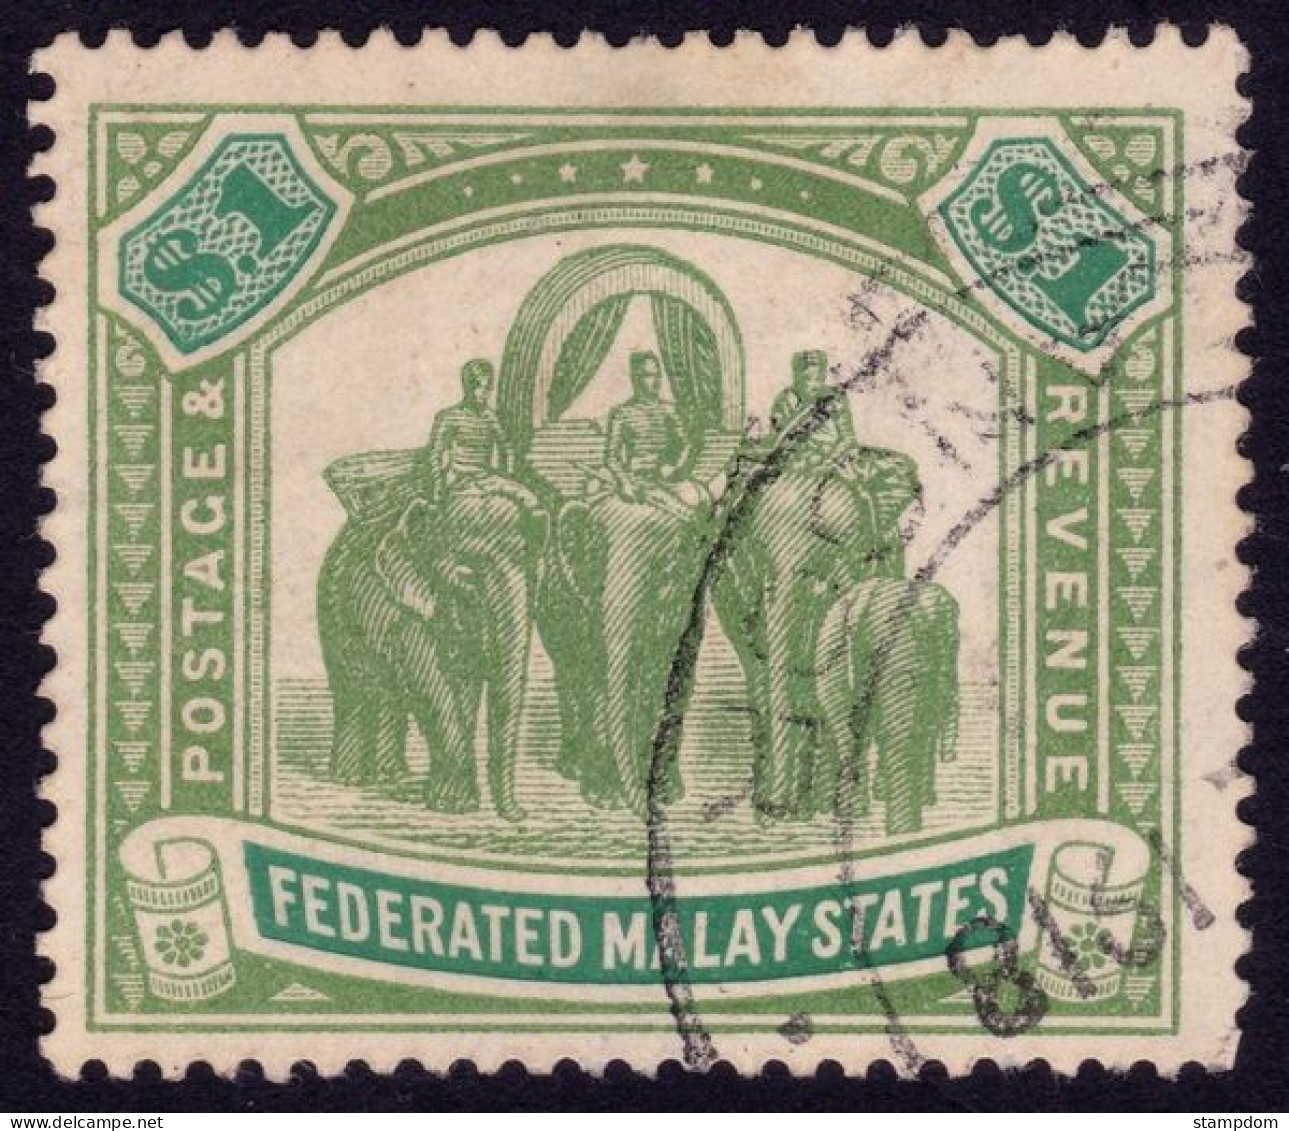 FEDERATED MALAY STATES FMS 1907 $1 Wmk.MCA Sc#34 - USED Fiscal Cancel @TE230 - Federated Malay States